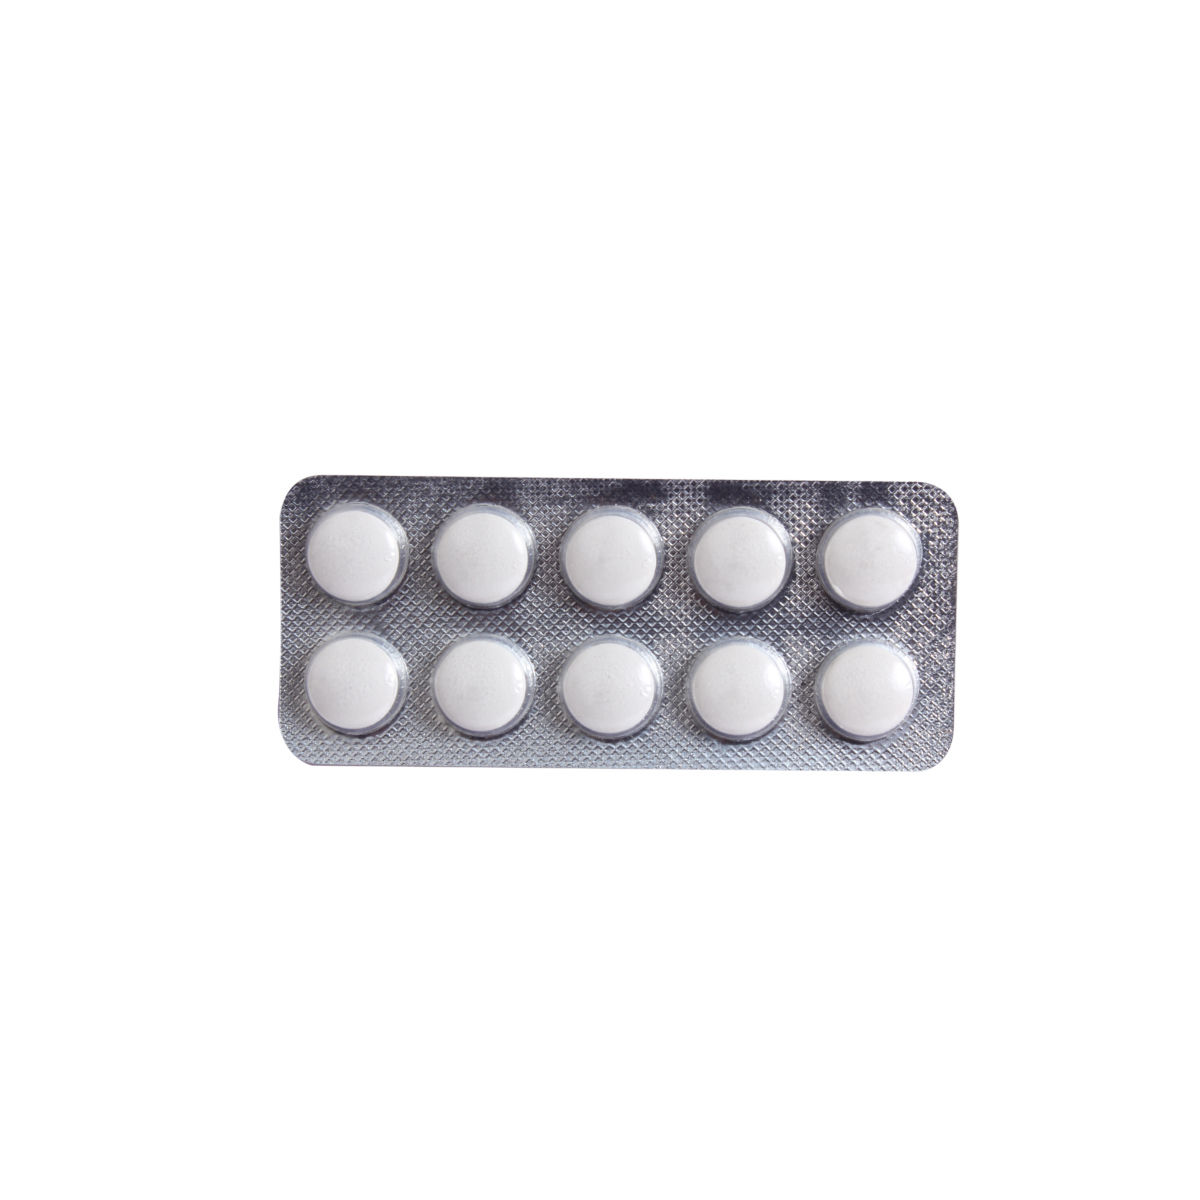 Mendate 10mg Tablet 10's, Pack of 10 TABLETS